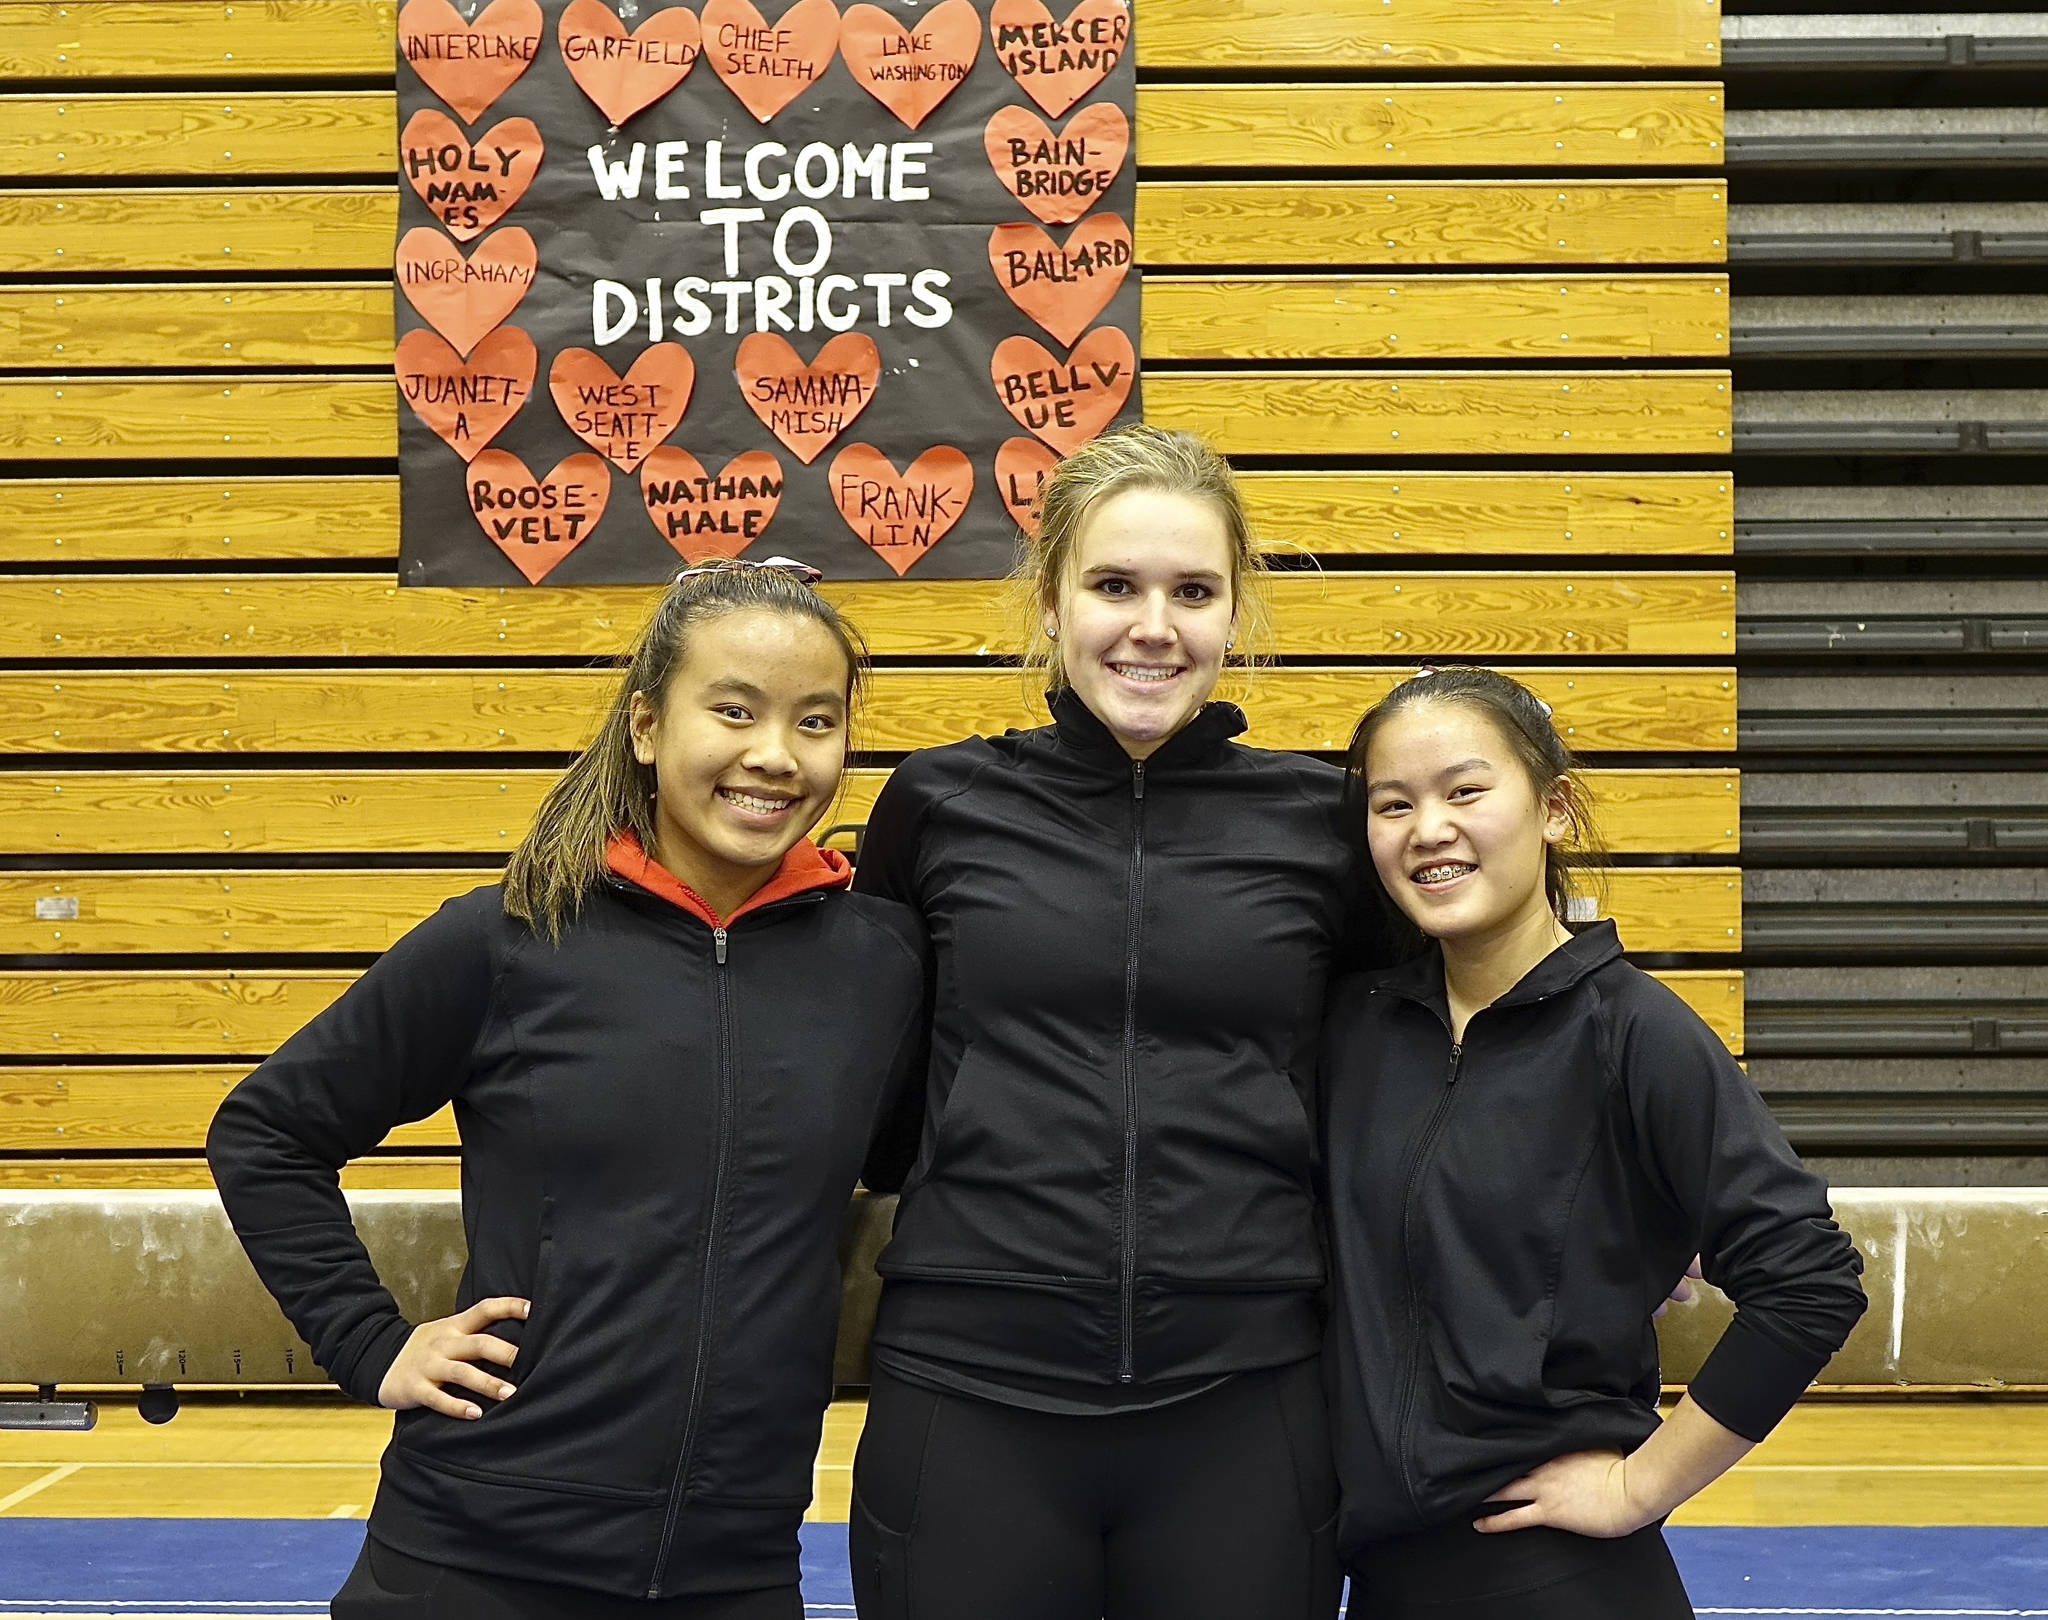 Three Mercer Island Islanders gymnasts will compete at the Class 3A state meet from Feb. 21-23 at Sammamish High School in Bellevue. Islanders athletes Ava Motroni (beam, vault), Emery Sampson (vault) and Rachel Ressmeyer (bars, floor, vault) will test their skills against the best gymnastics athletes in Washington at the state meet. Photo courtesy of Debra Gibbs